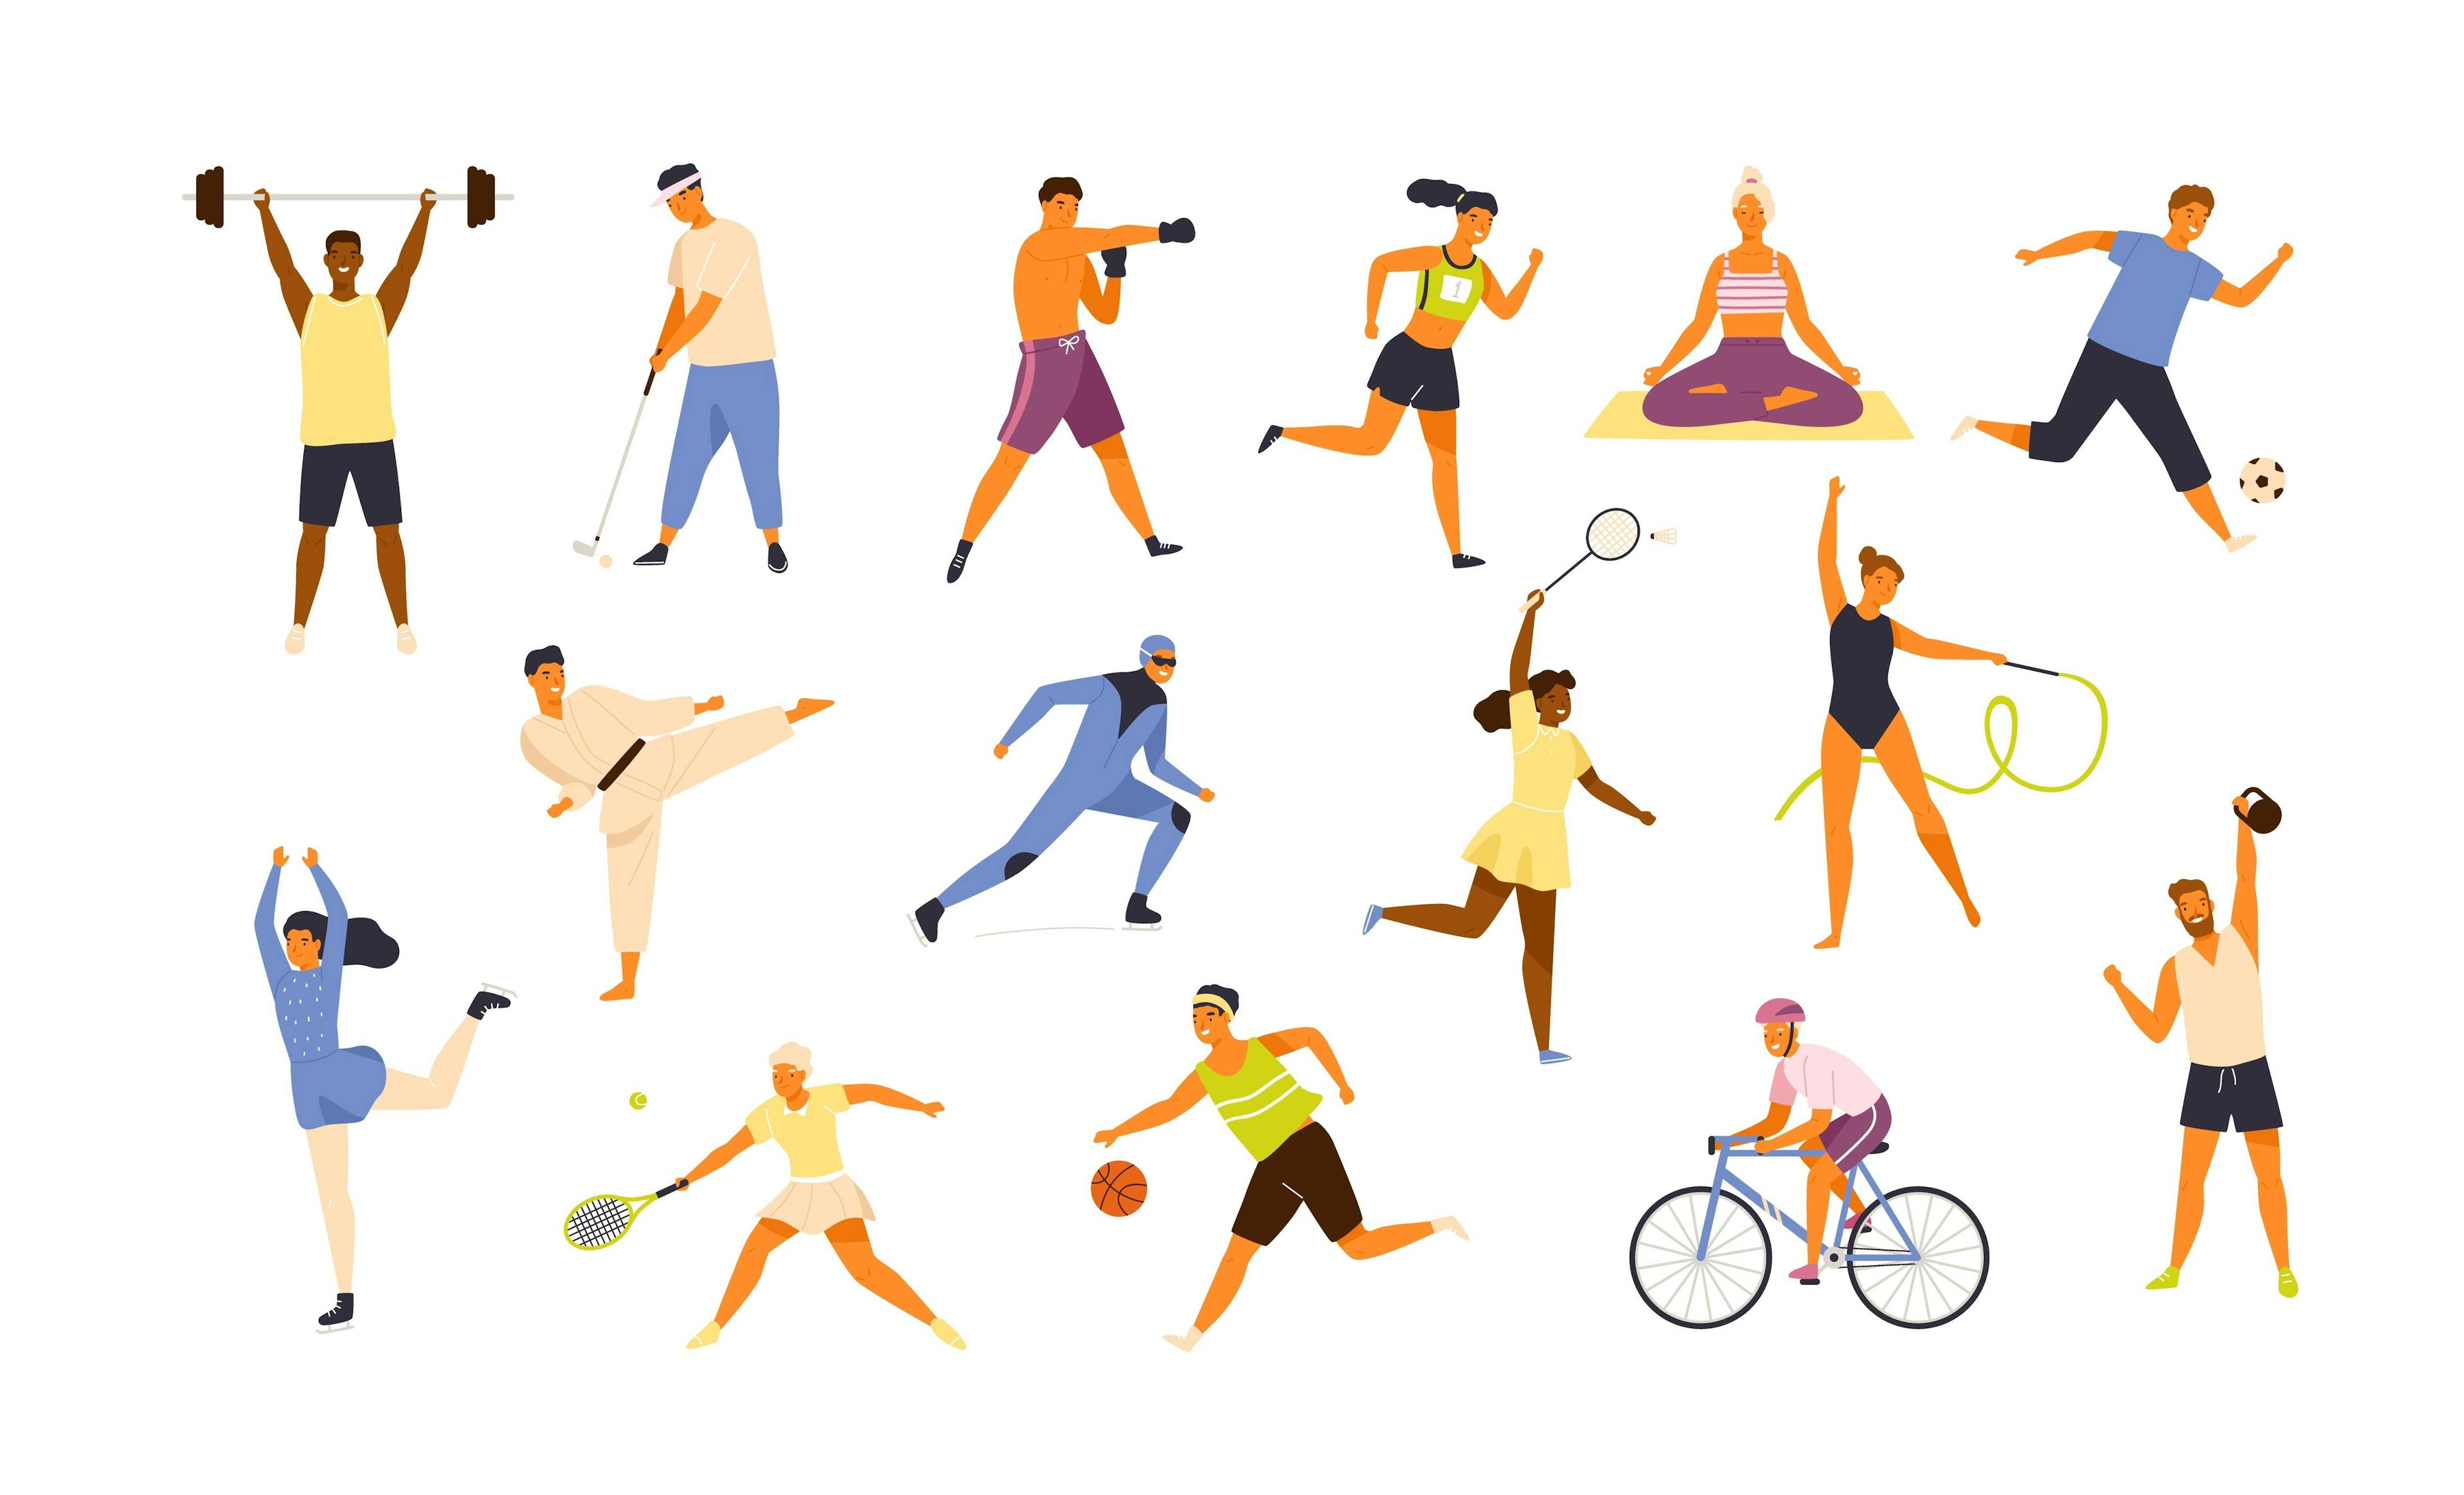 Collection of cute funny men and women performing various sports activities. Bundle of happy training or exercising people isolated on white background. Vector illustration in flat cartoon style. | Image Credit: © Good Studio - stock.adobe.com